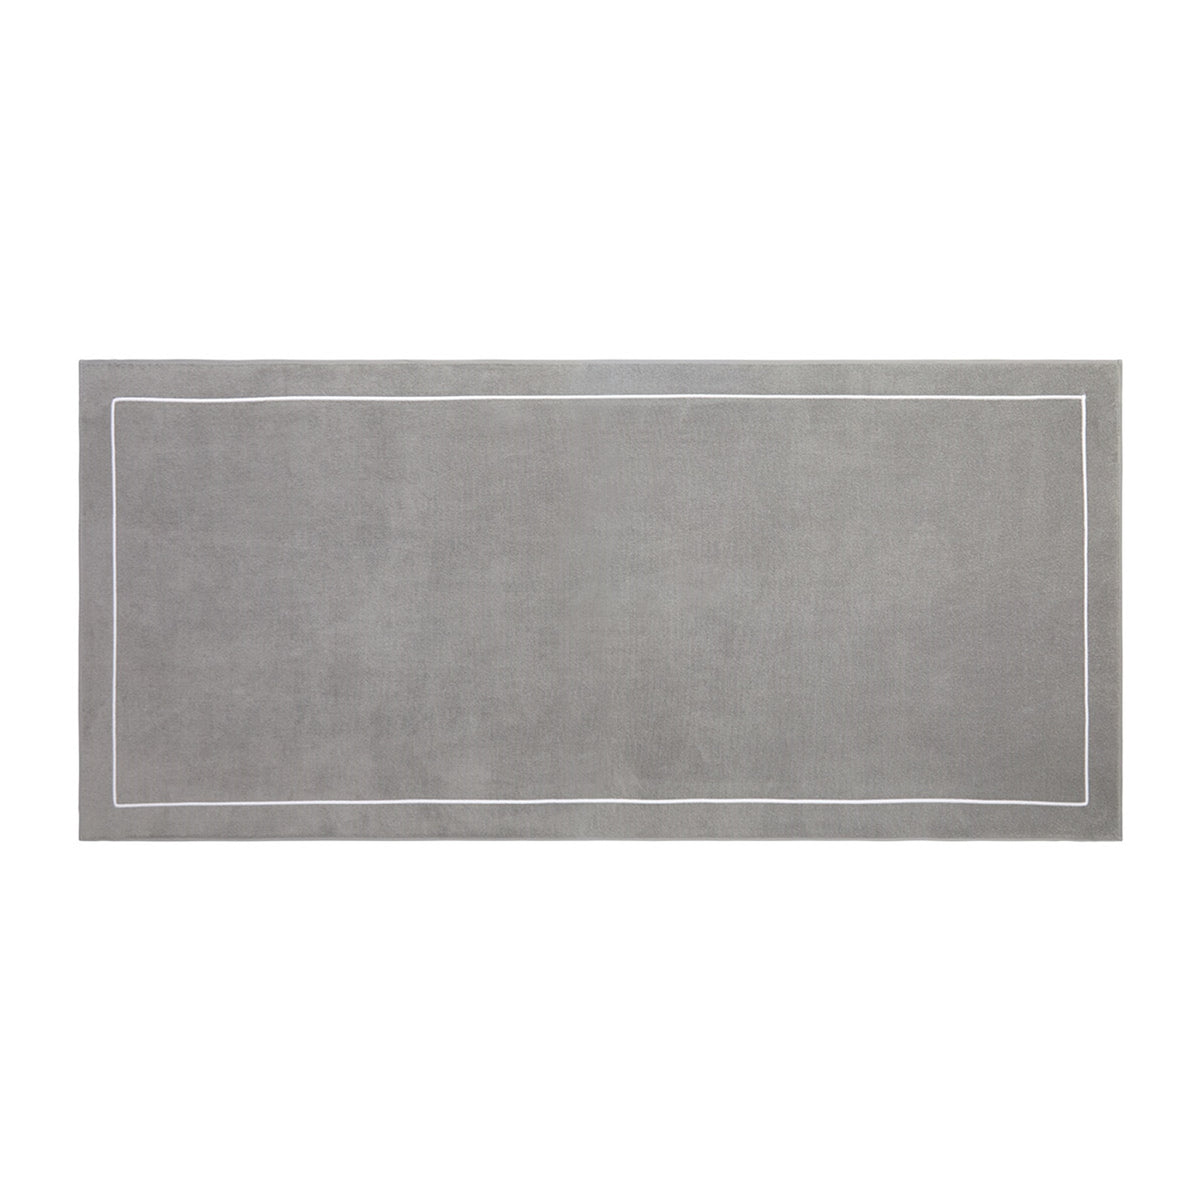 Clear Image of Yves Delorme Croisiere Beach Towels Platine